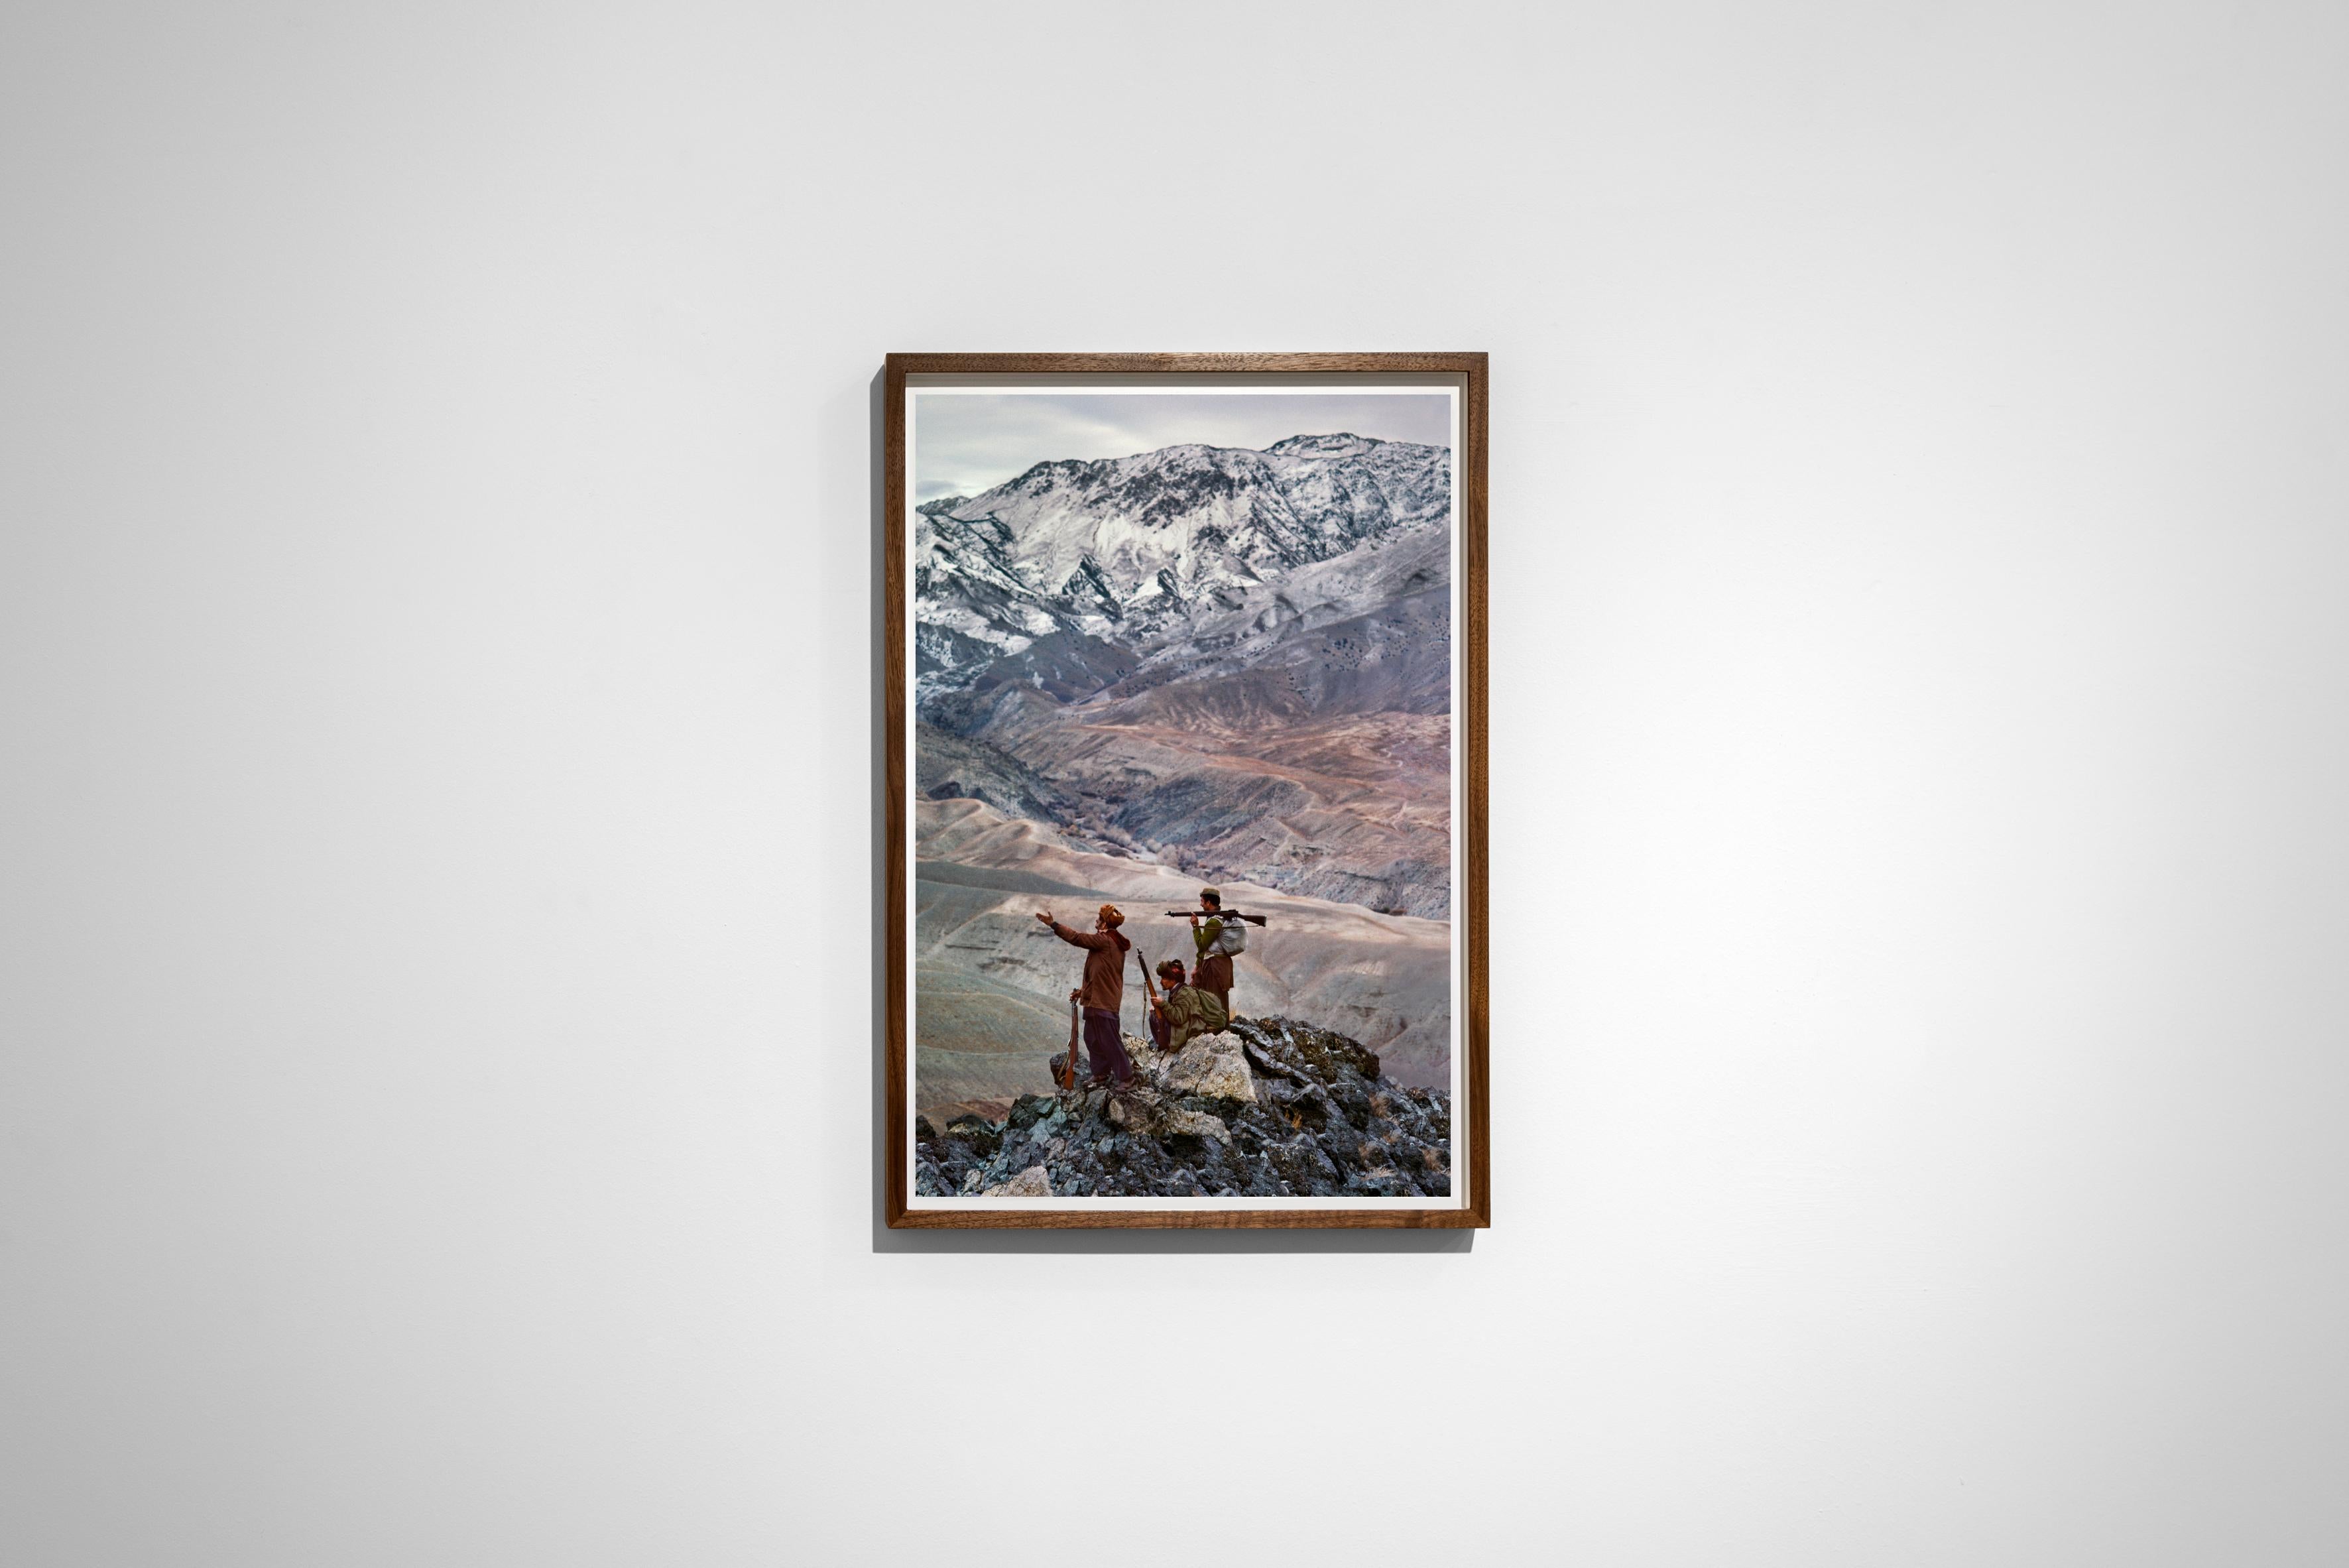 Mujahideen Stand Atop a Mountain in the Hindu Kush, 1984 - Steve McCurry 
Signed and numbered on photographer's edition label on reverse 
Digital c-type print

Printed on 20 x 24 inch paper
Edition of 30  

Also available in 2 larger sizes, please